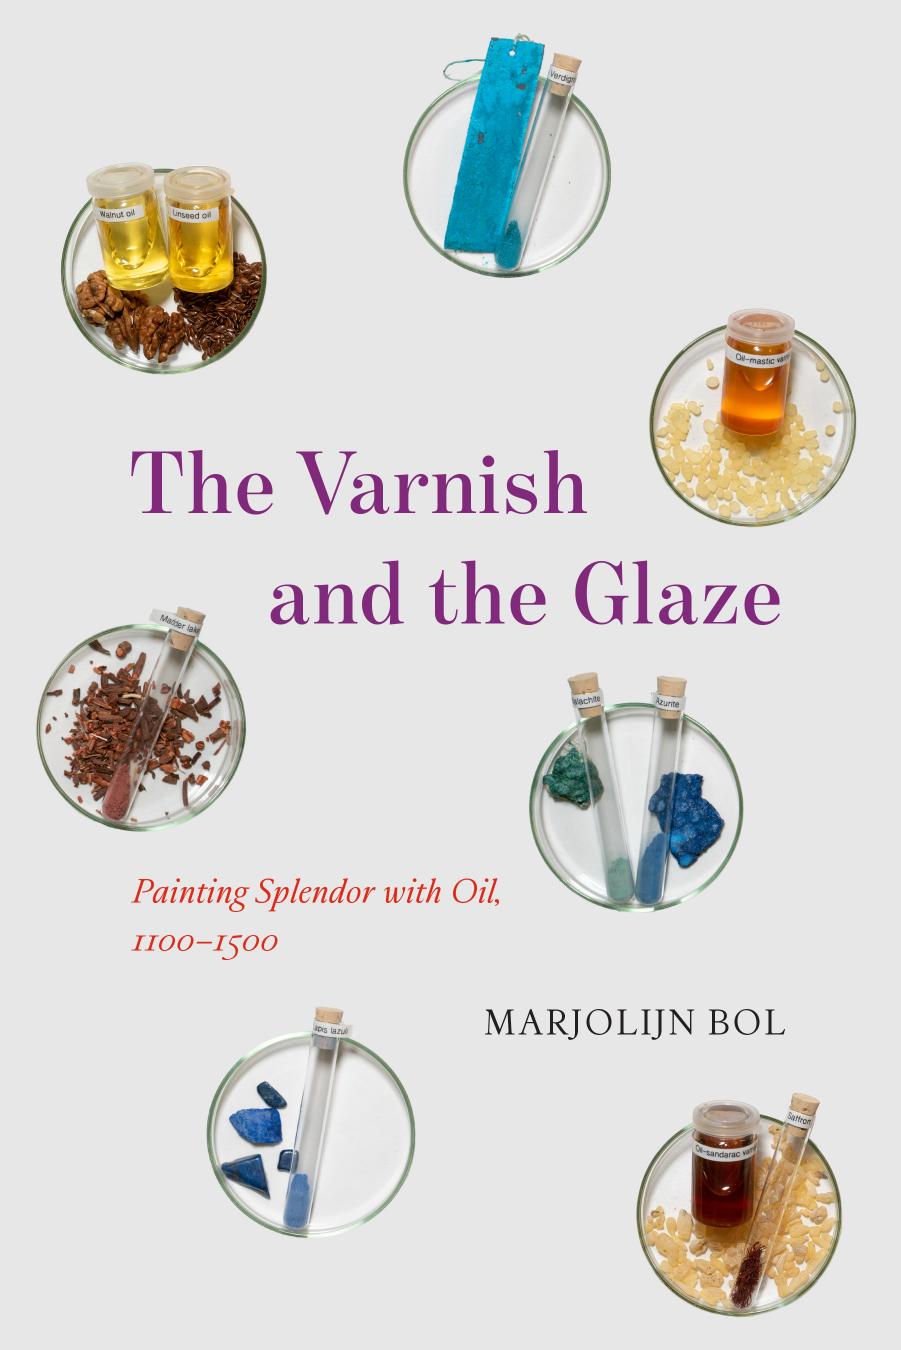 The Varnish and the Glaze: Painting Splendor with Oil, 1100â1500 by Marjolijn Bol